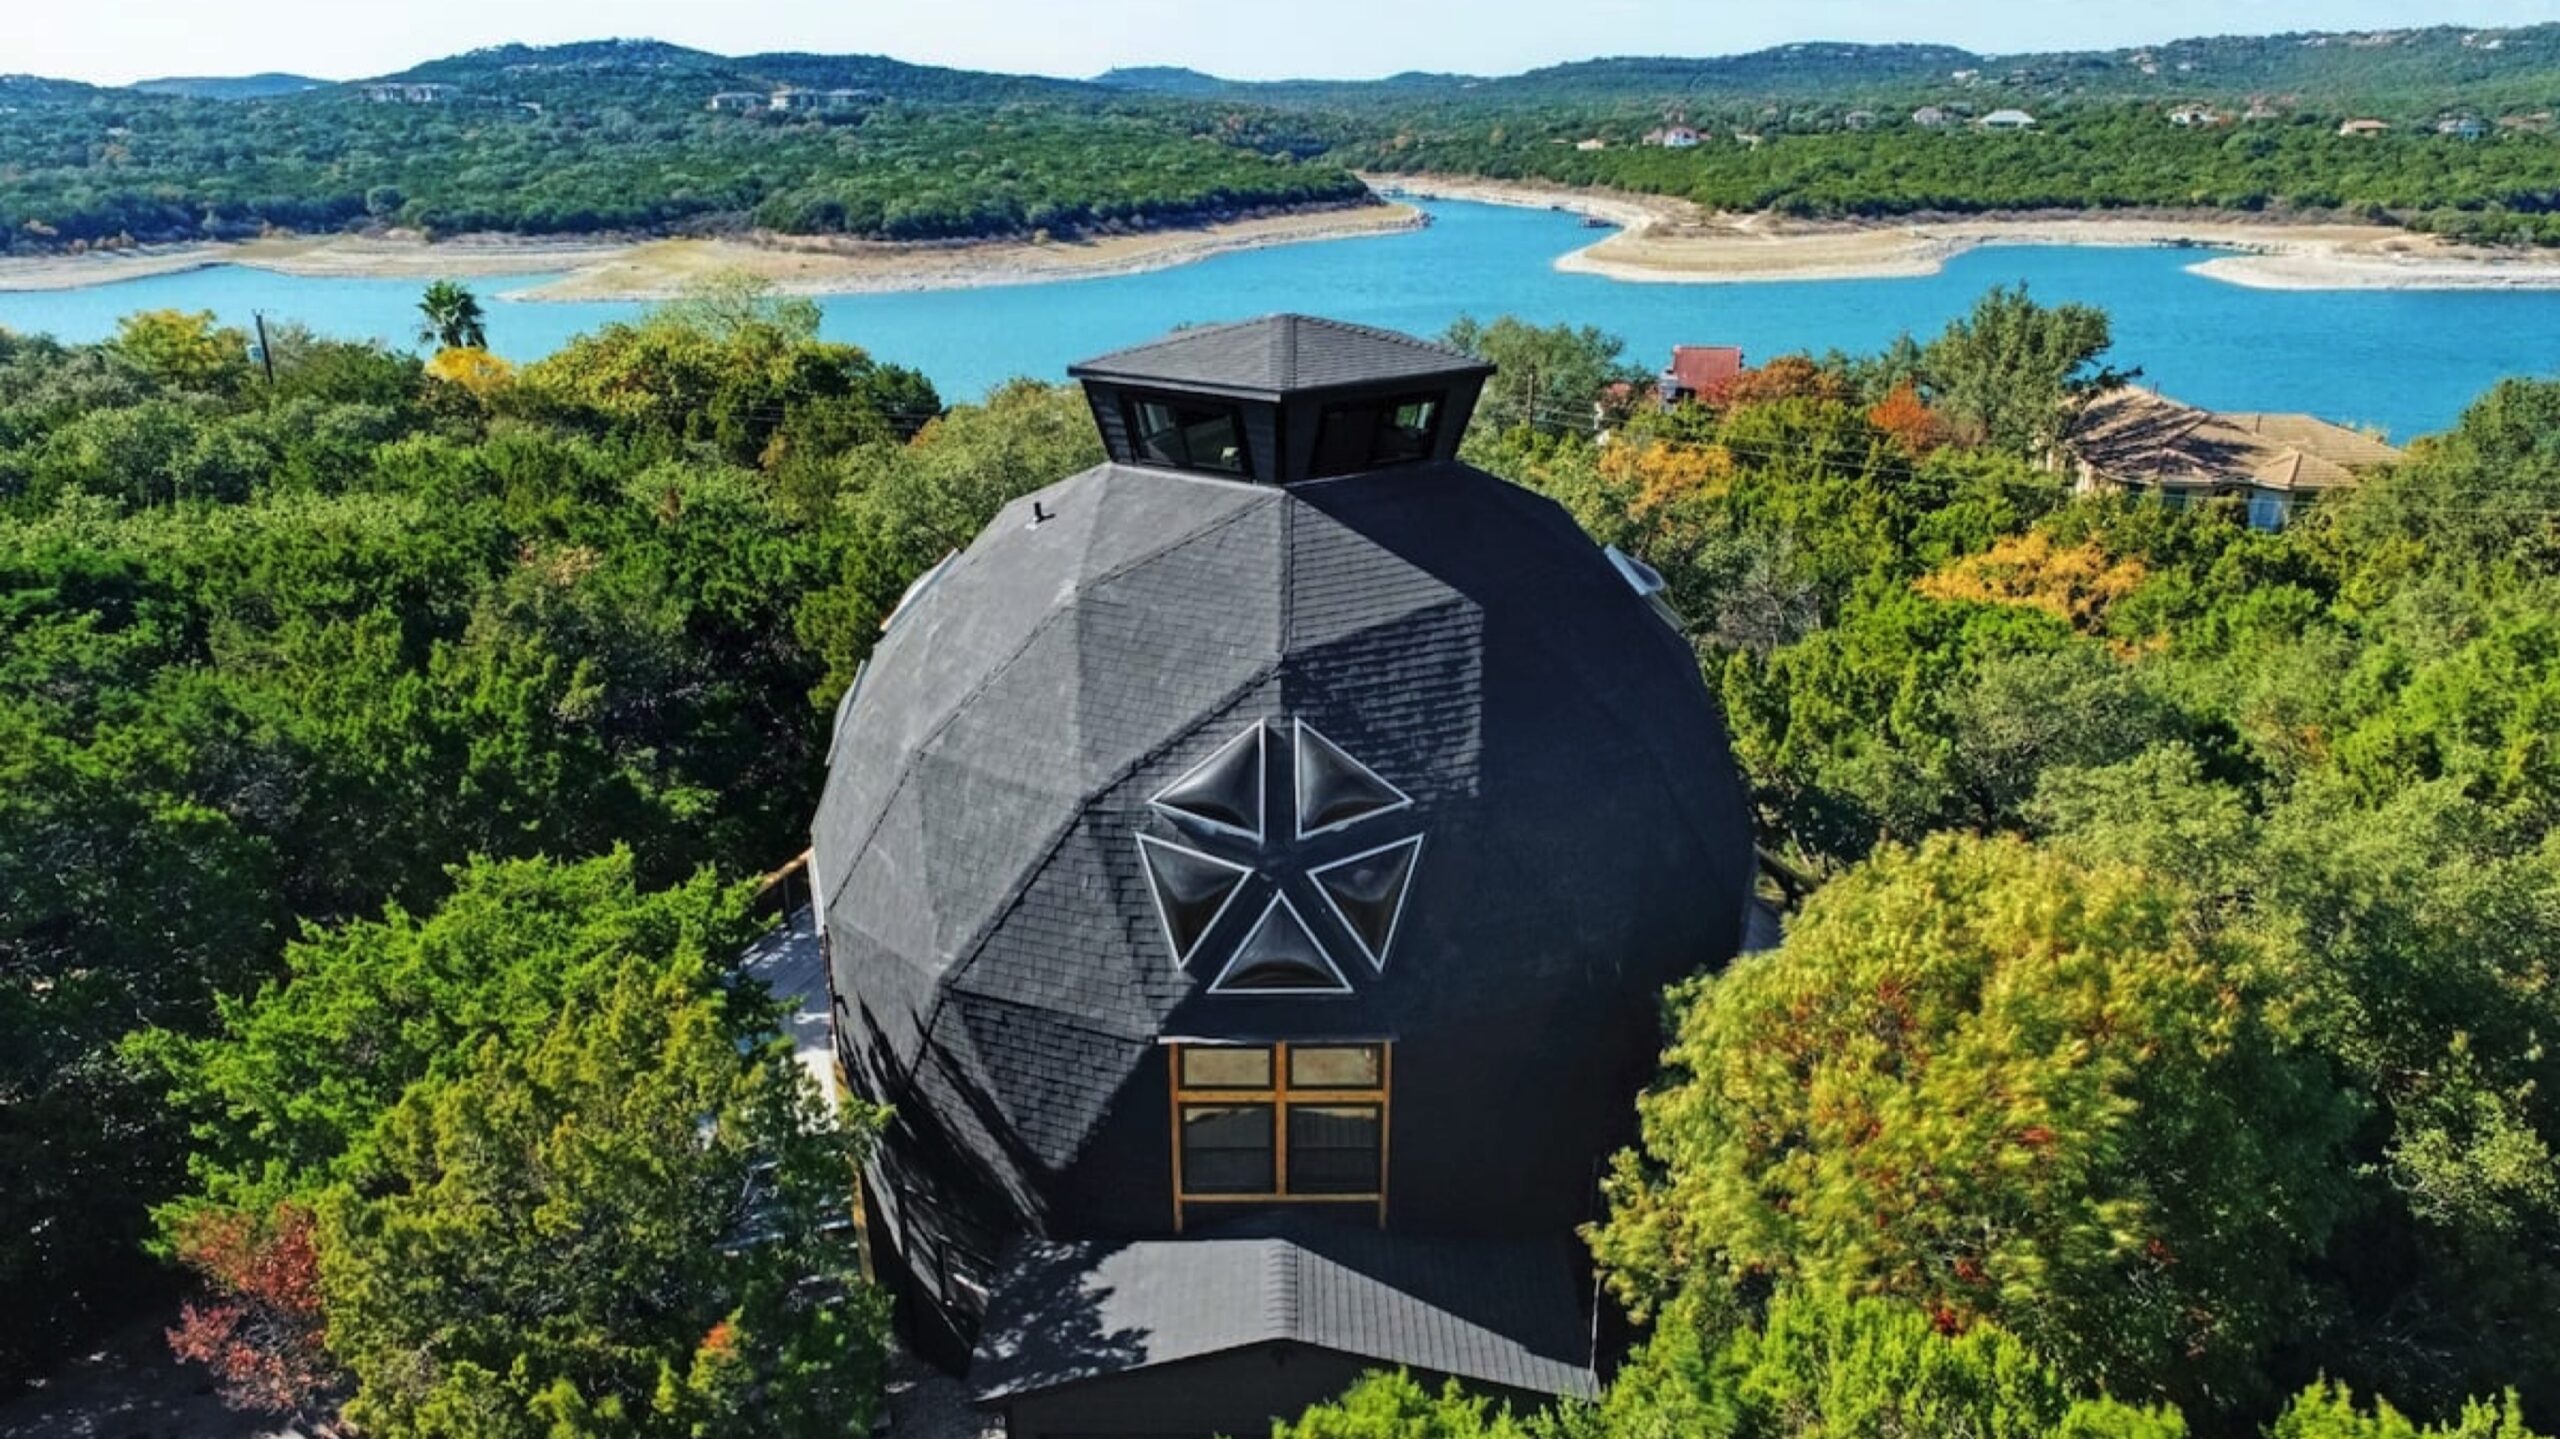 The Ultimate Luxury Living: Experience the Coolest Airbnb in Texas with The Onward Real Estate Team